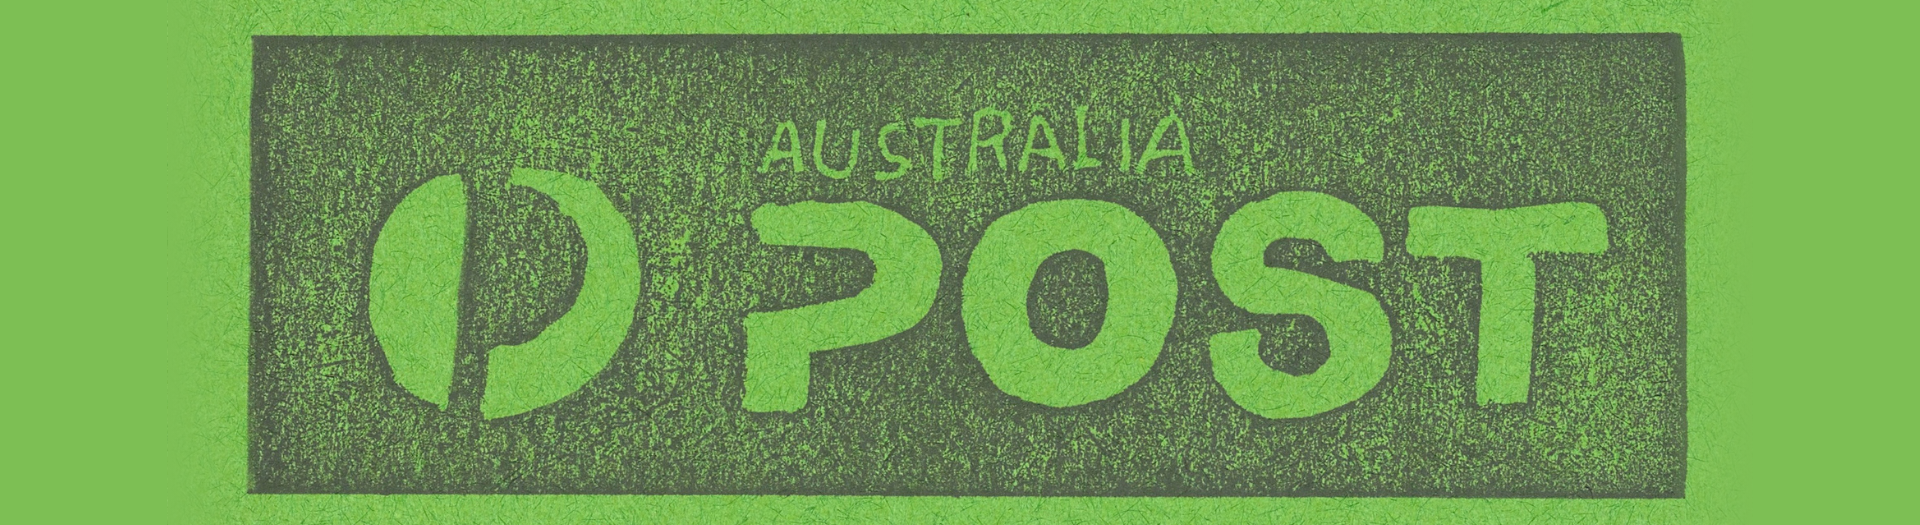 A green background with the 2018 Australia Post logo printed on it.